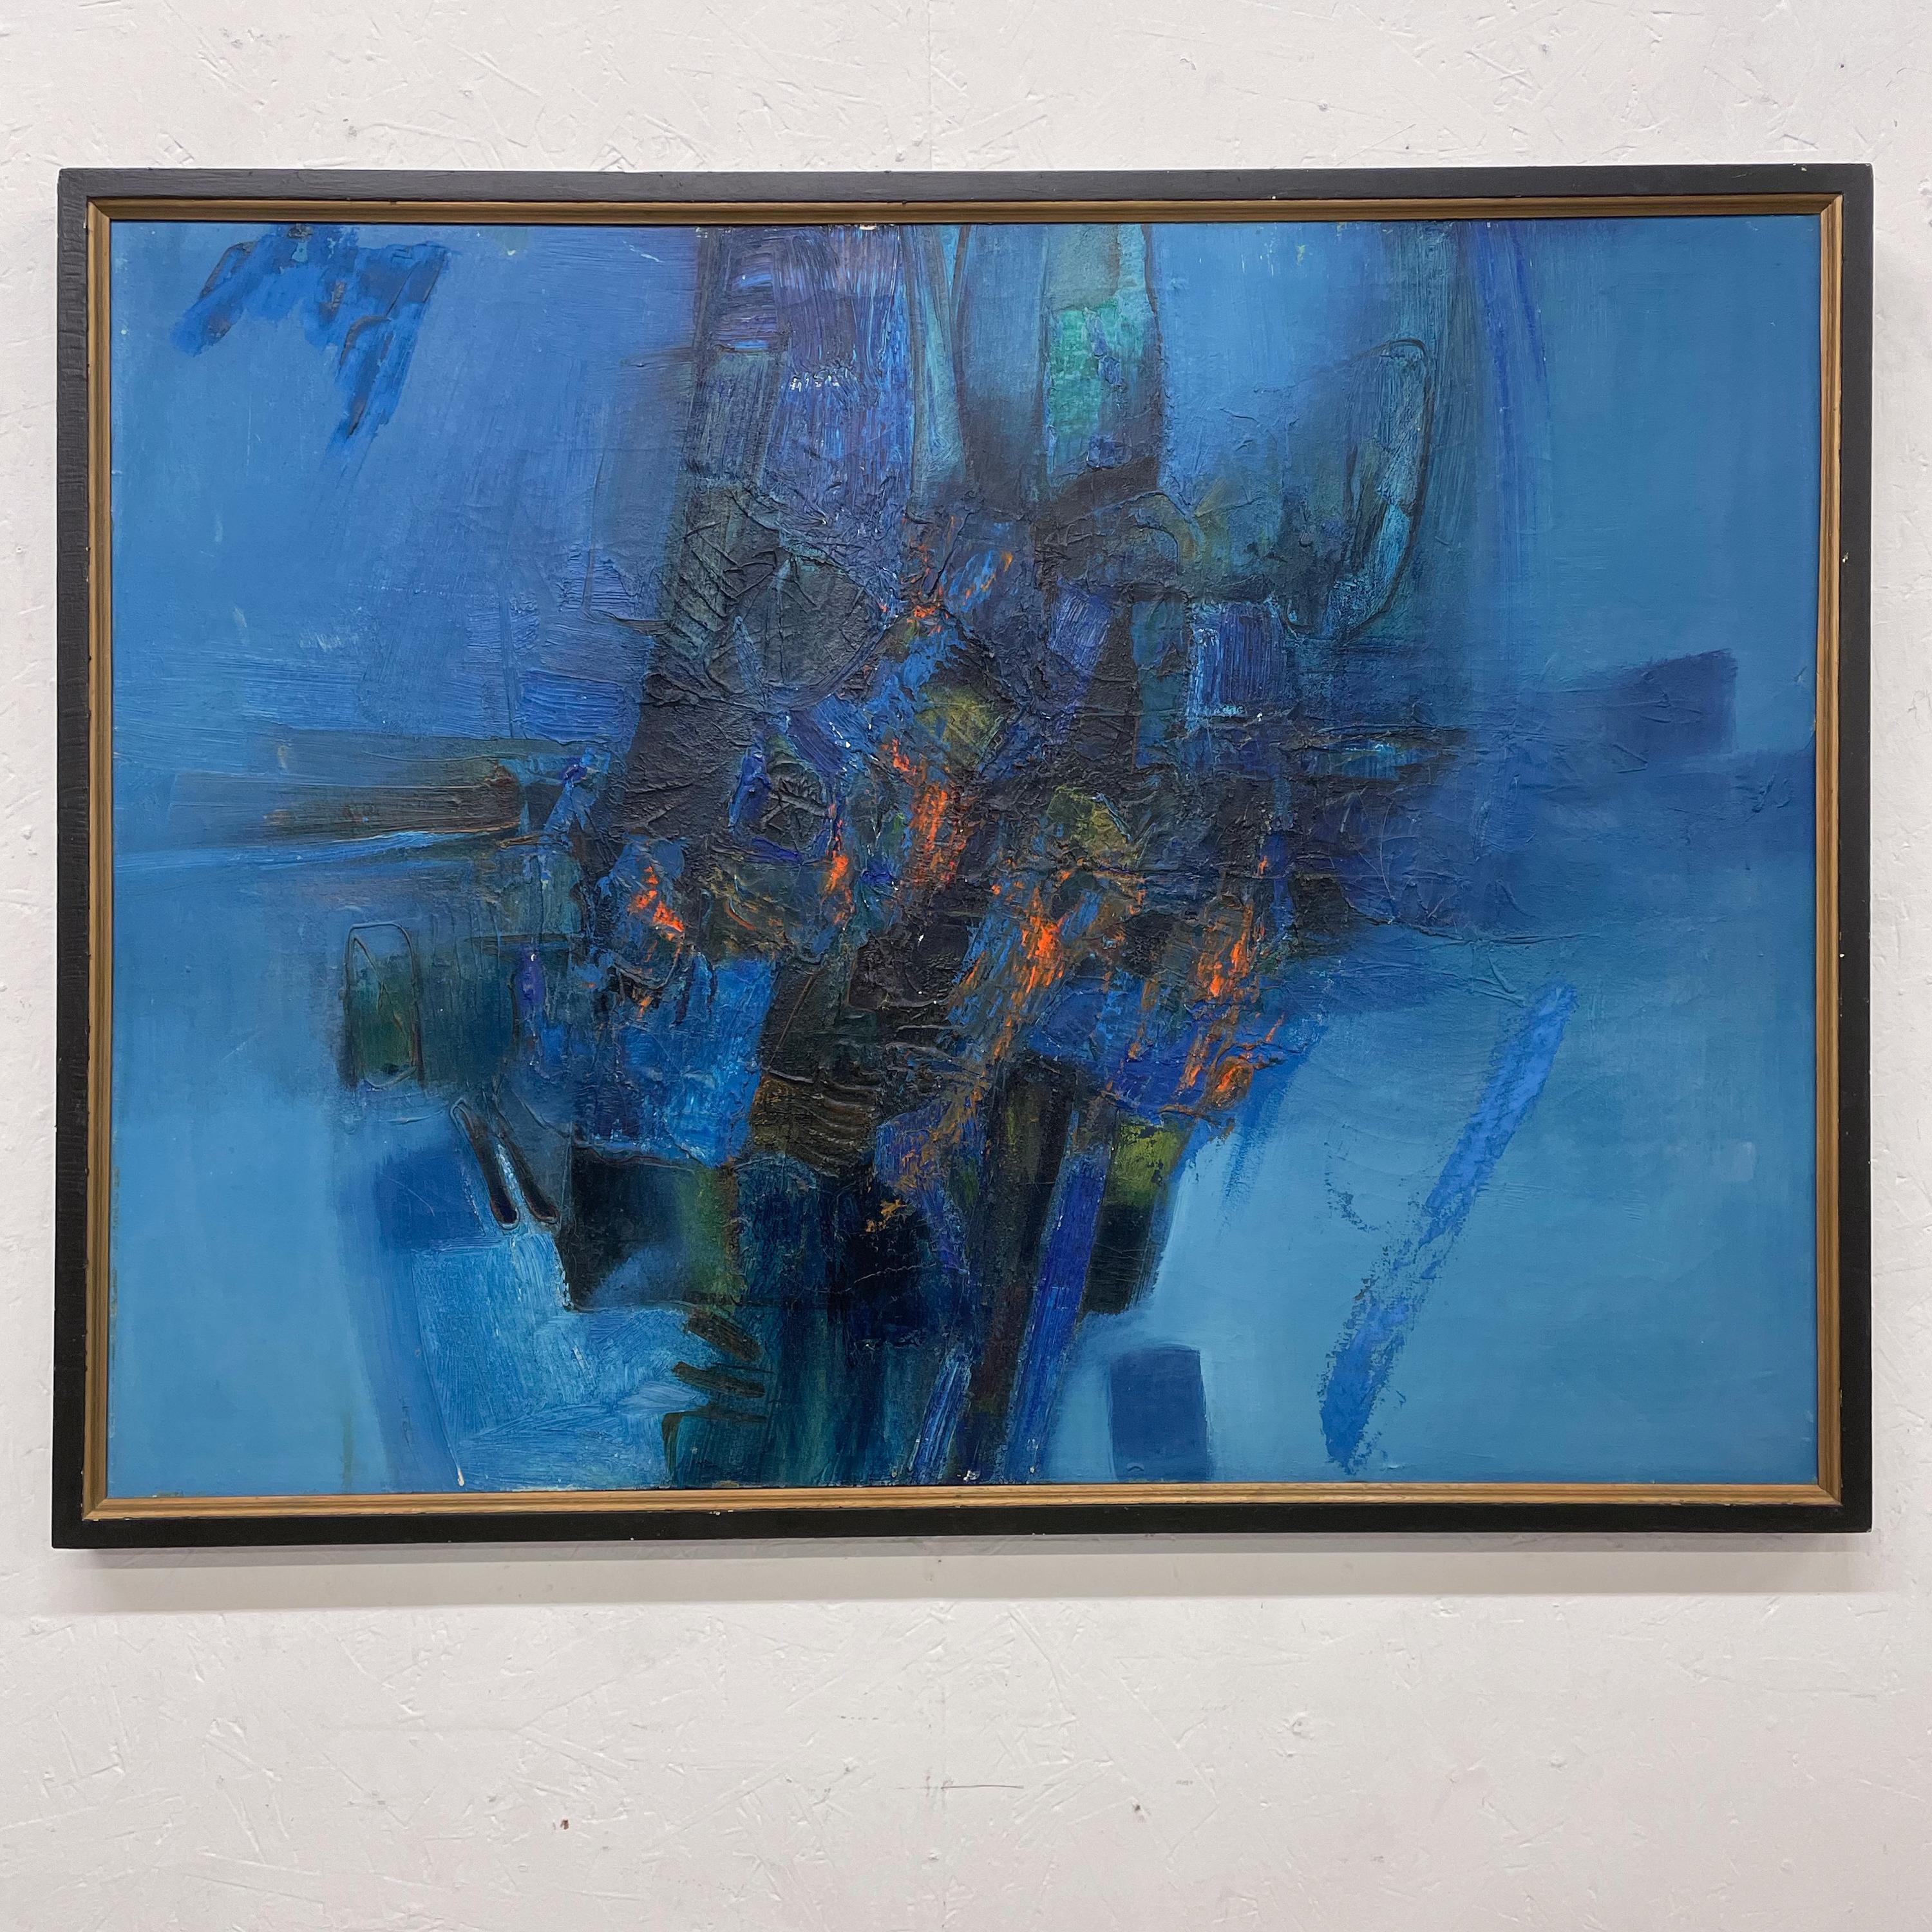 Modern abstract painting in vibrant blue an oil on canvas artwork.
signed on backside Brooke 1985
 Framed art.
 41.5 x 31.5 Tall x 2 D
Original unrestored vintage condition preowned.
Delivery to LA offered. 
   


  